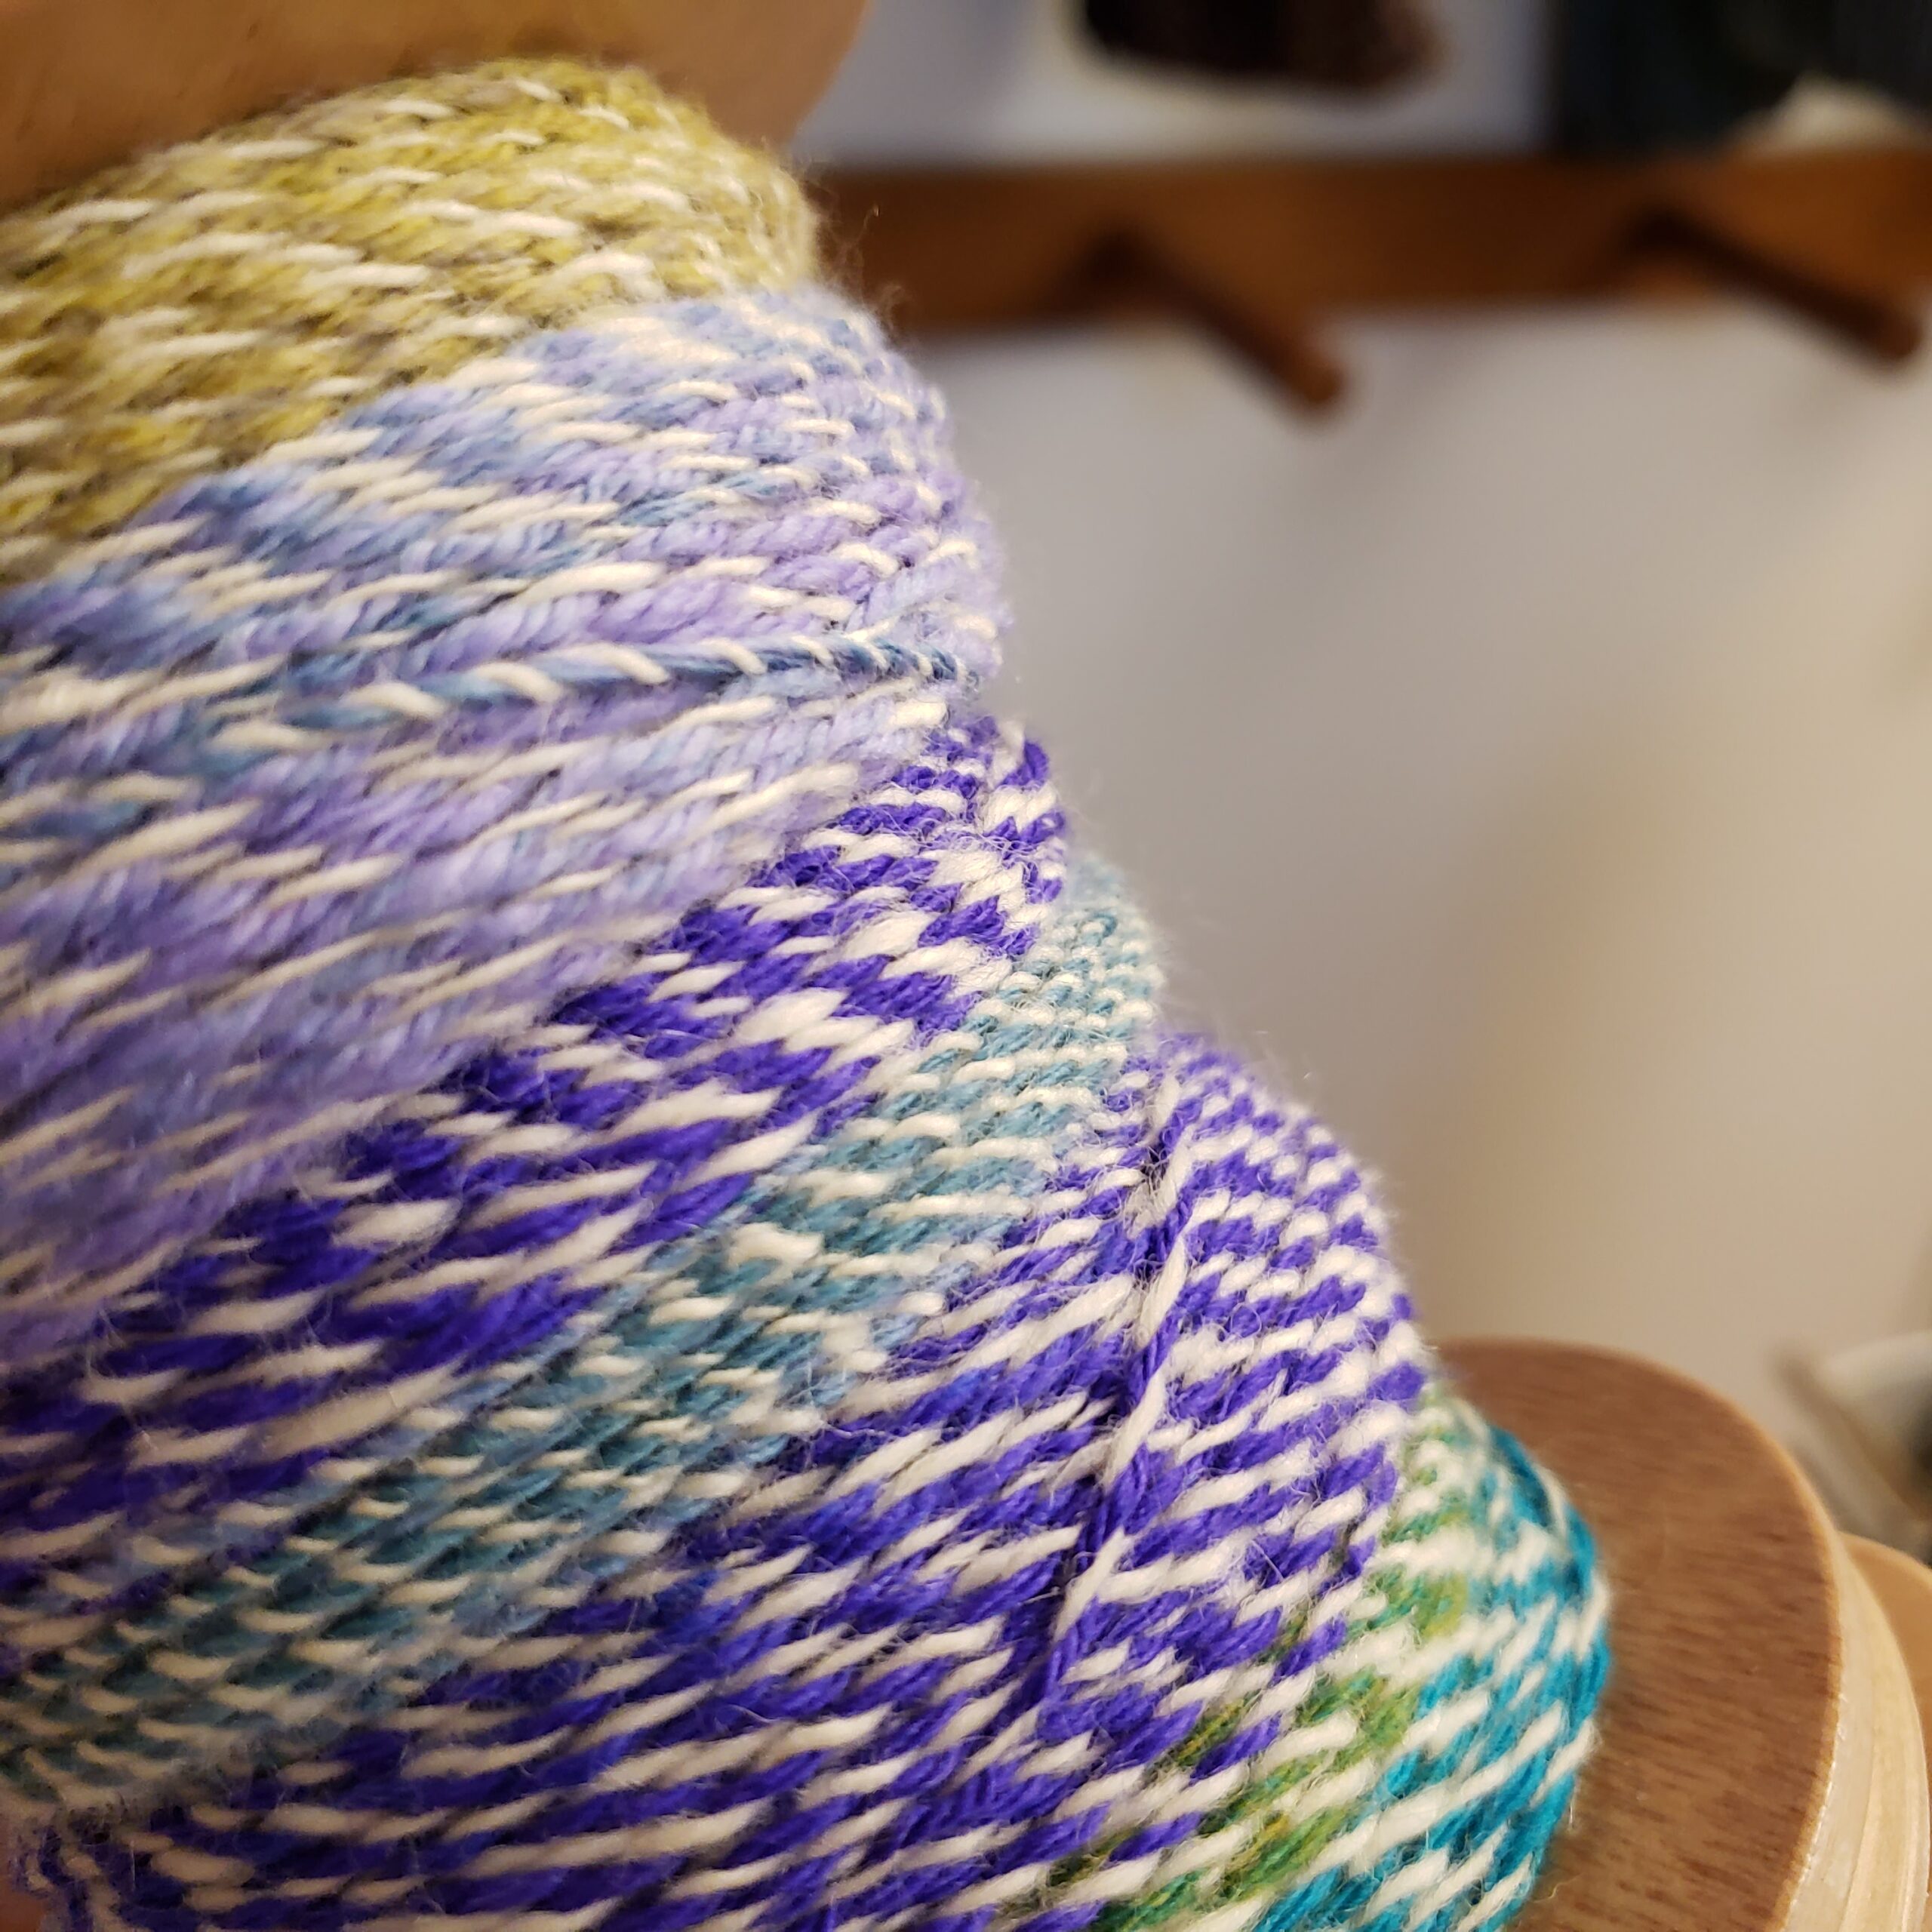 8-Ply Handspun Yarn — A Cabled Crepe Adventure